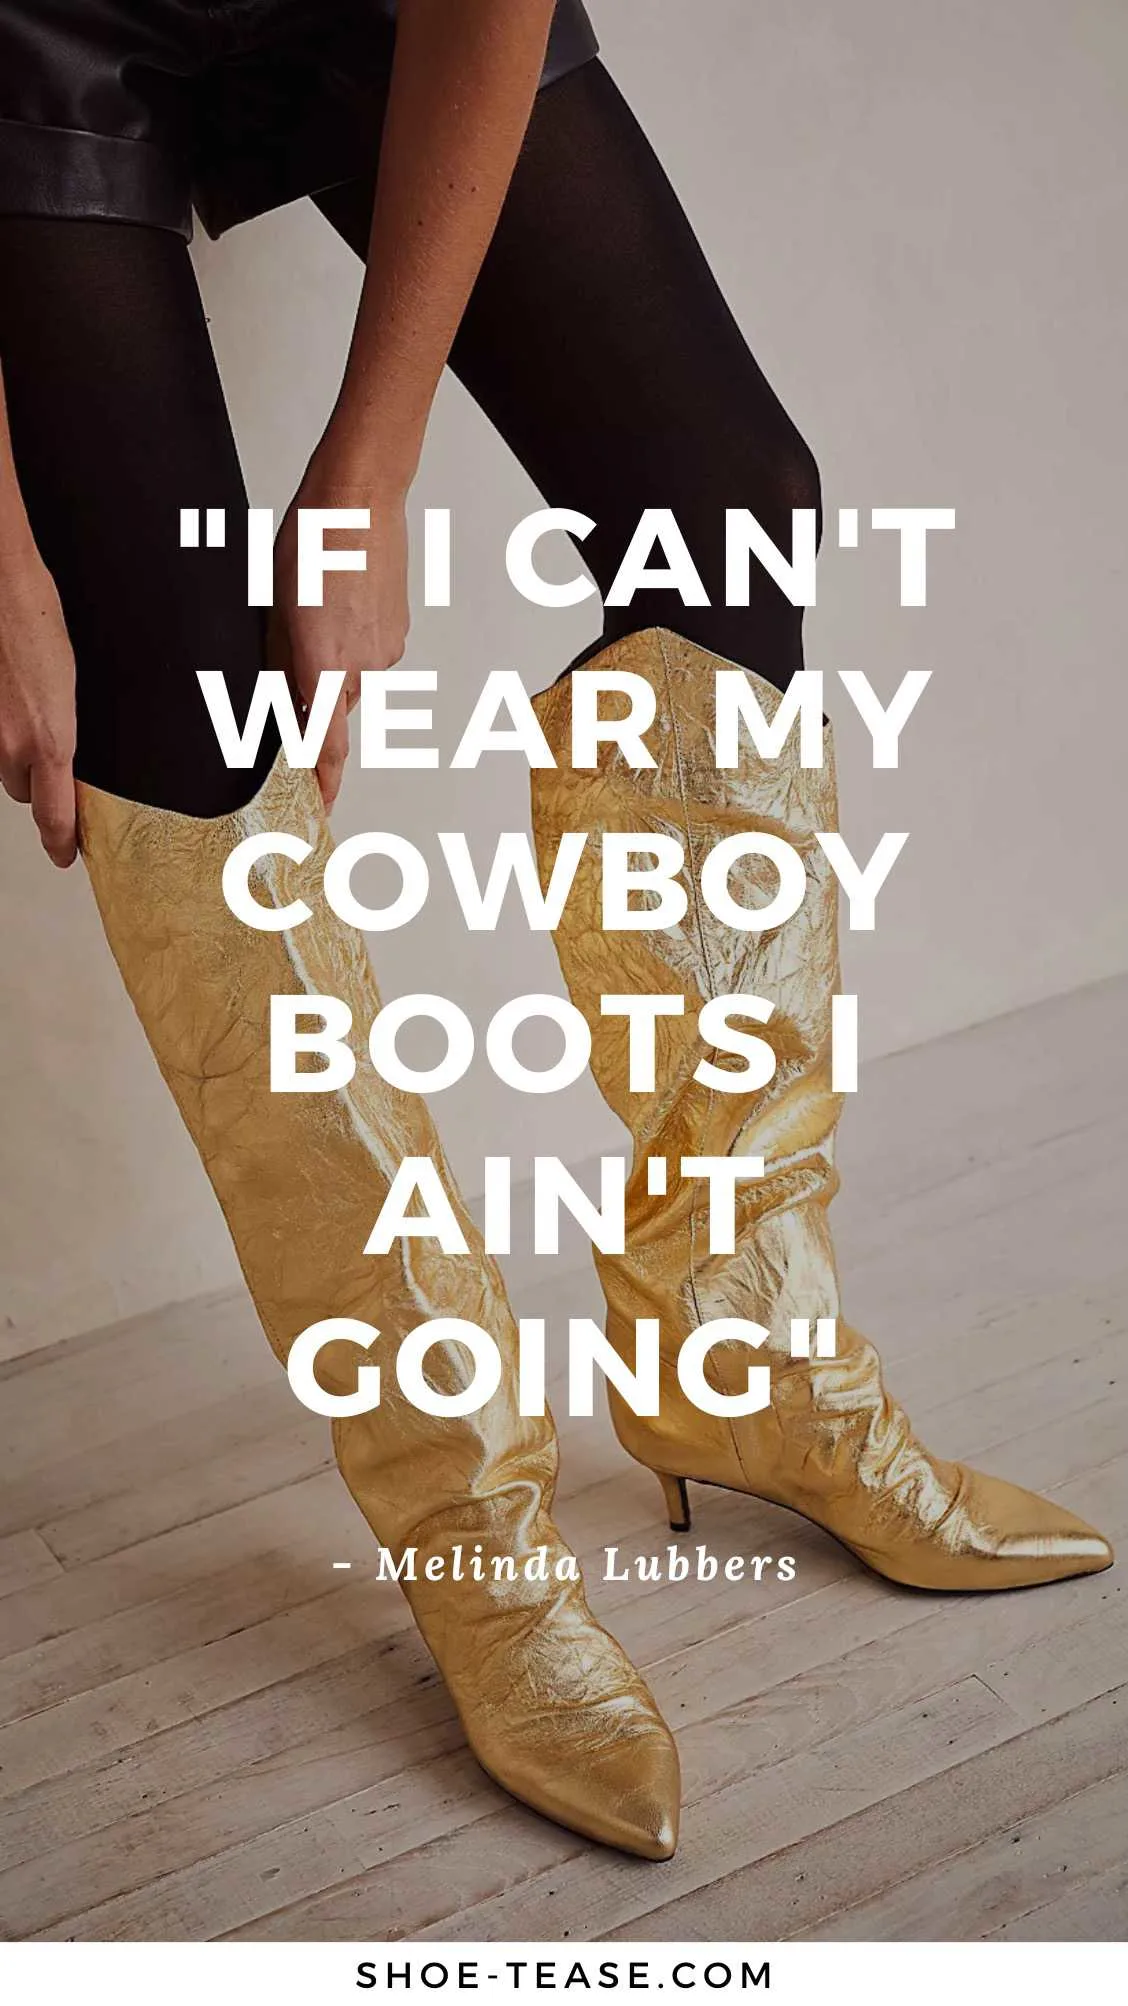 Quote reading If I can't wear my cowboy boots I ain't going over image of woman putting on gold cowboy boots over black skinny jeans.